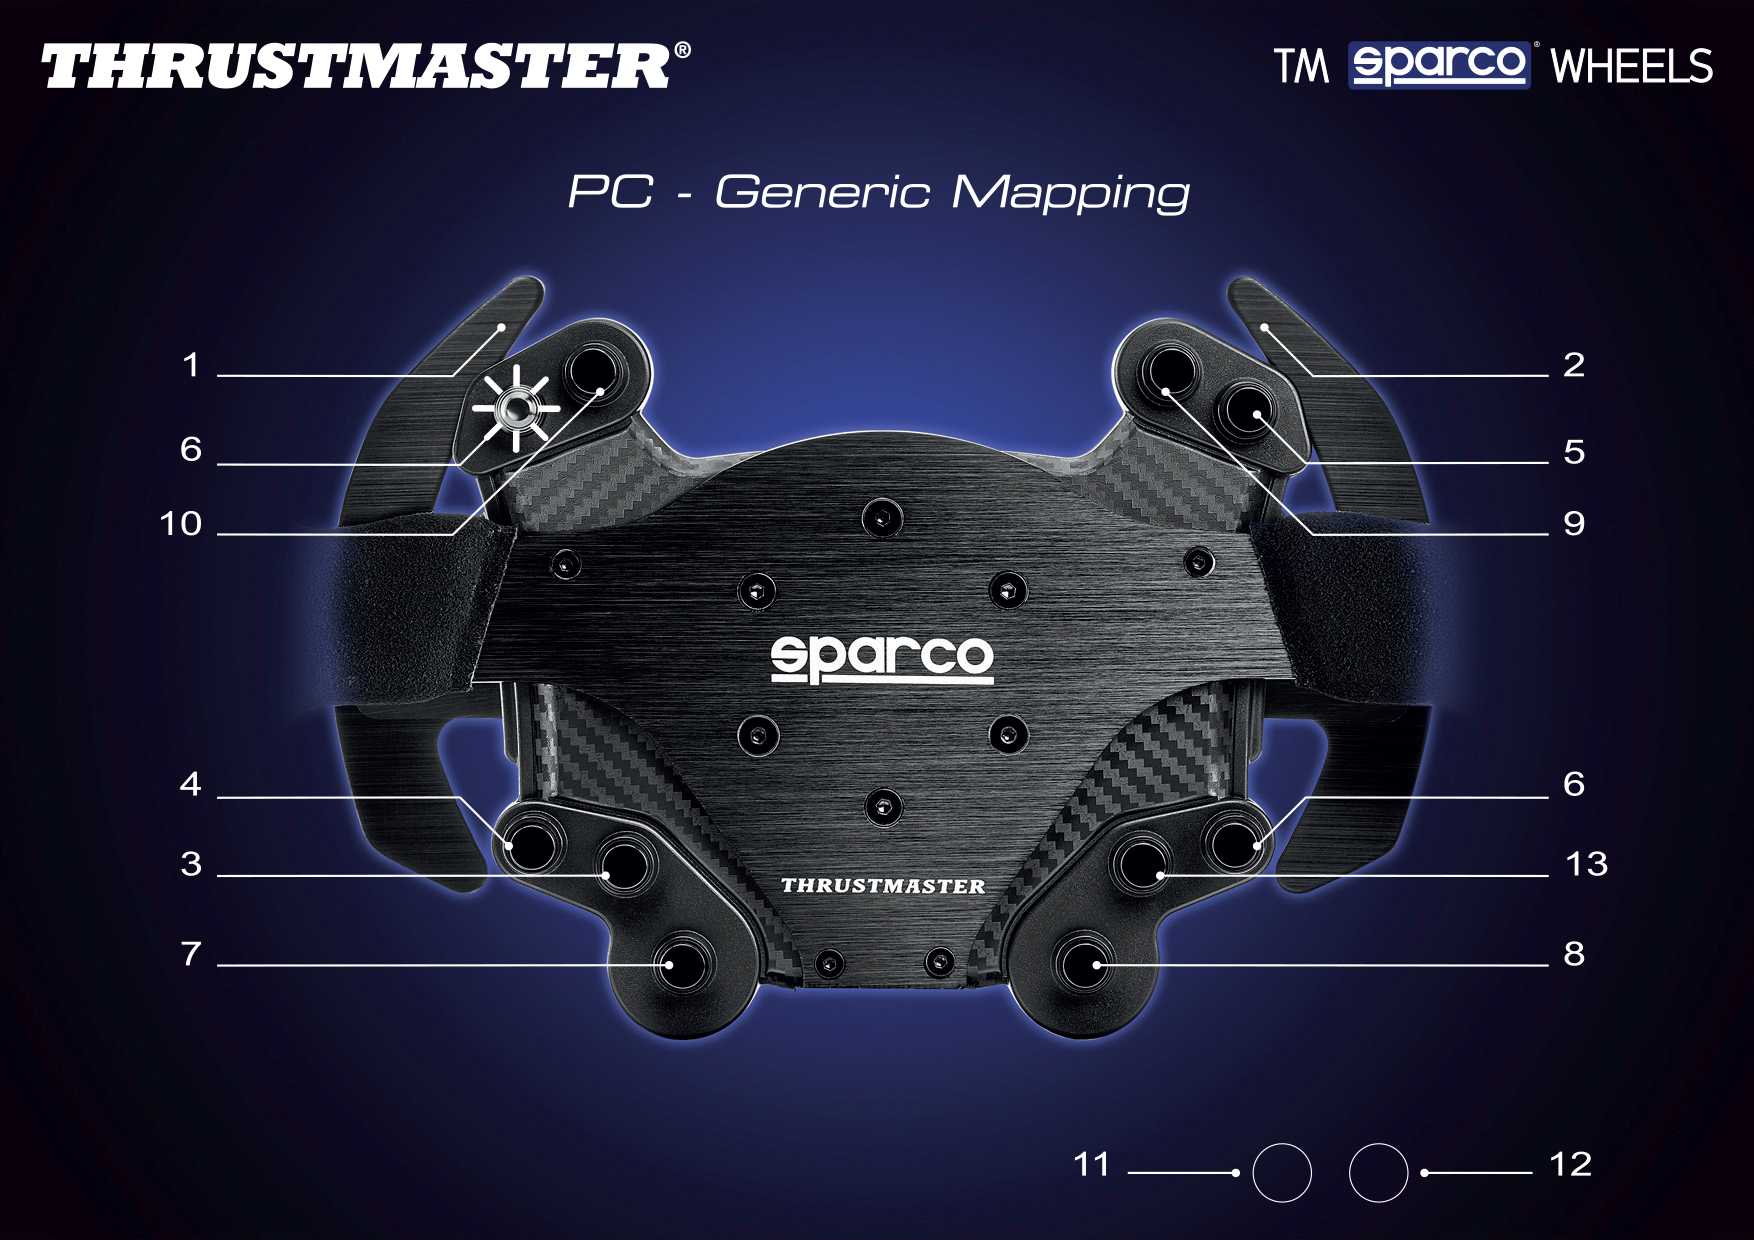 T300RS GT Edition - Thrustmaster - Technical support website